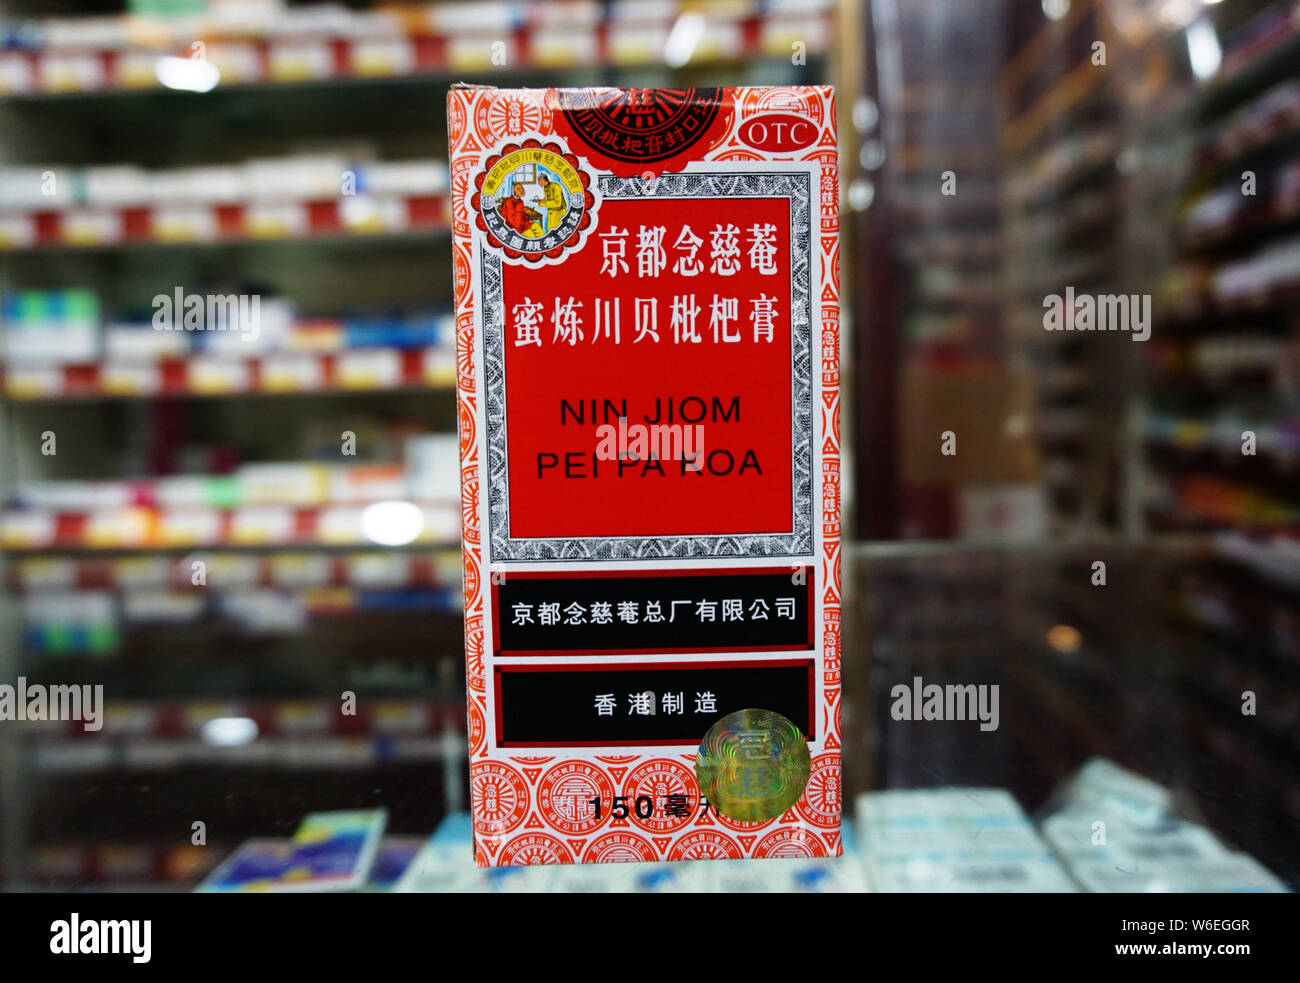 A bottle of Chinese traditional cough syrup, Nin Jiom Pei Pa Koa, is for sale at a pharmacy in Hangzhou city, east China's Zhejiang province, 27 Febru Stock Photo